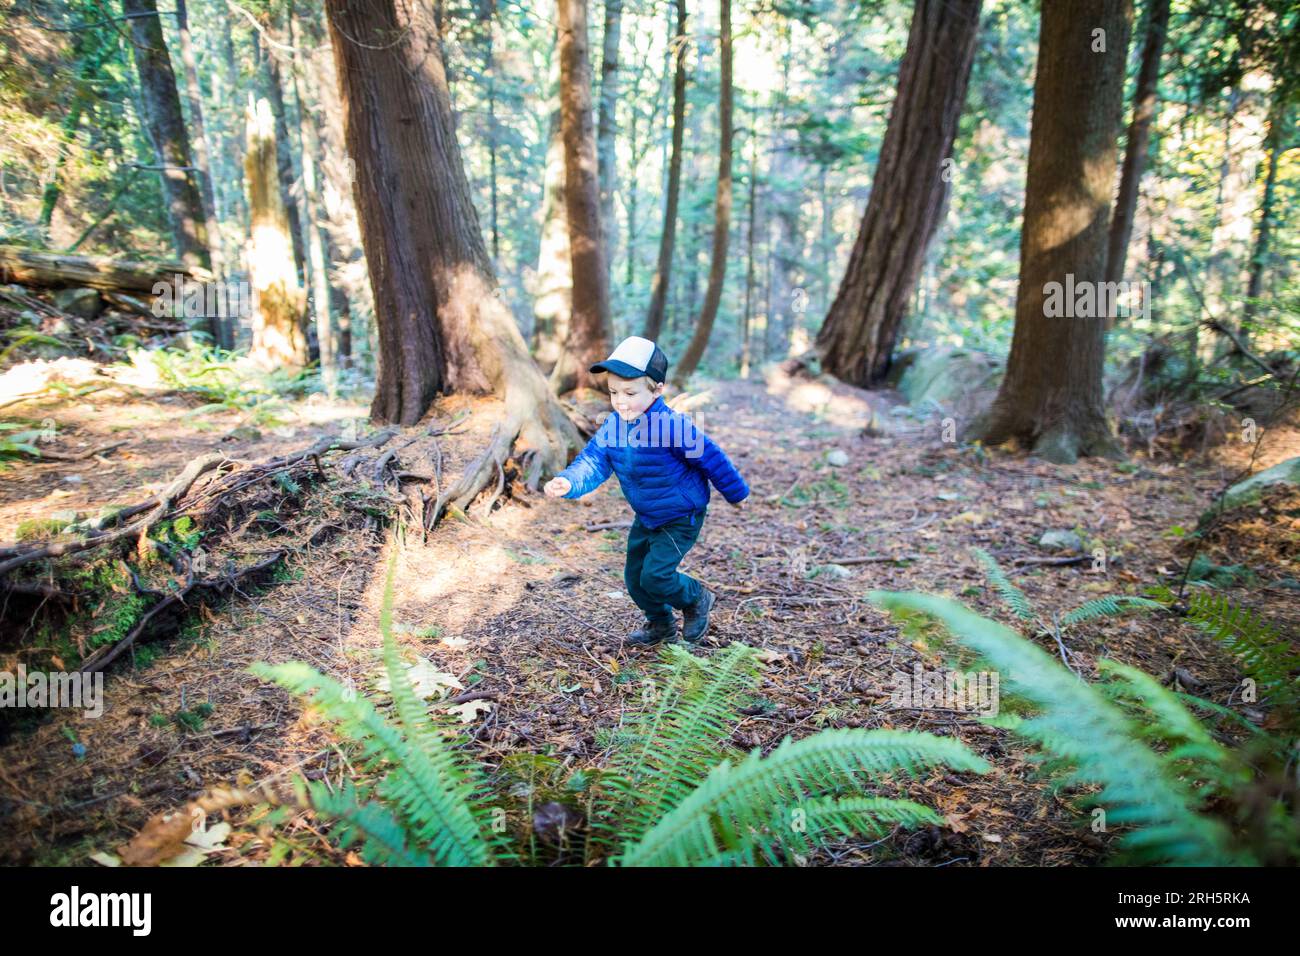 Young boy running through forest, ferns. Stock Photo